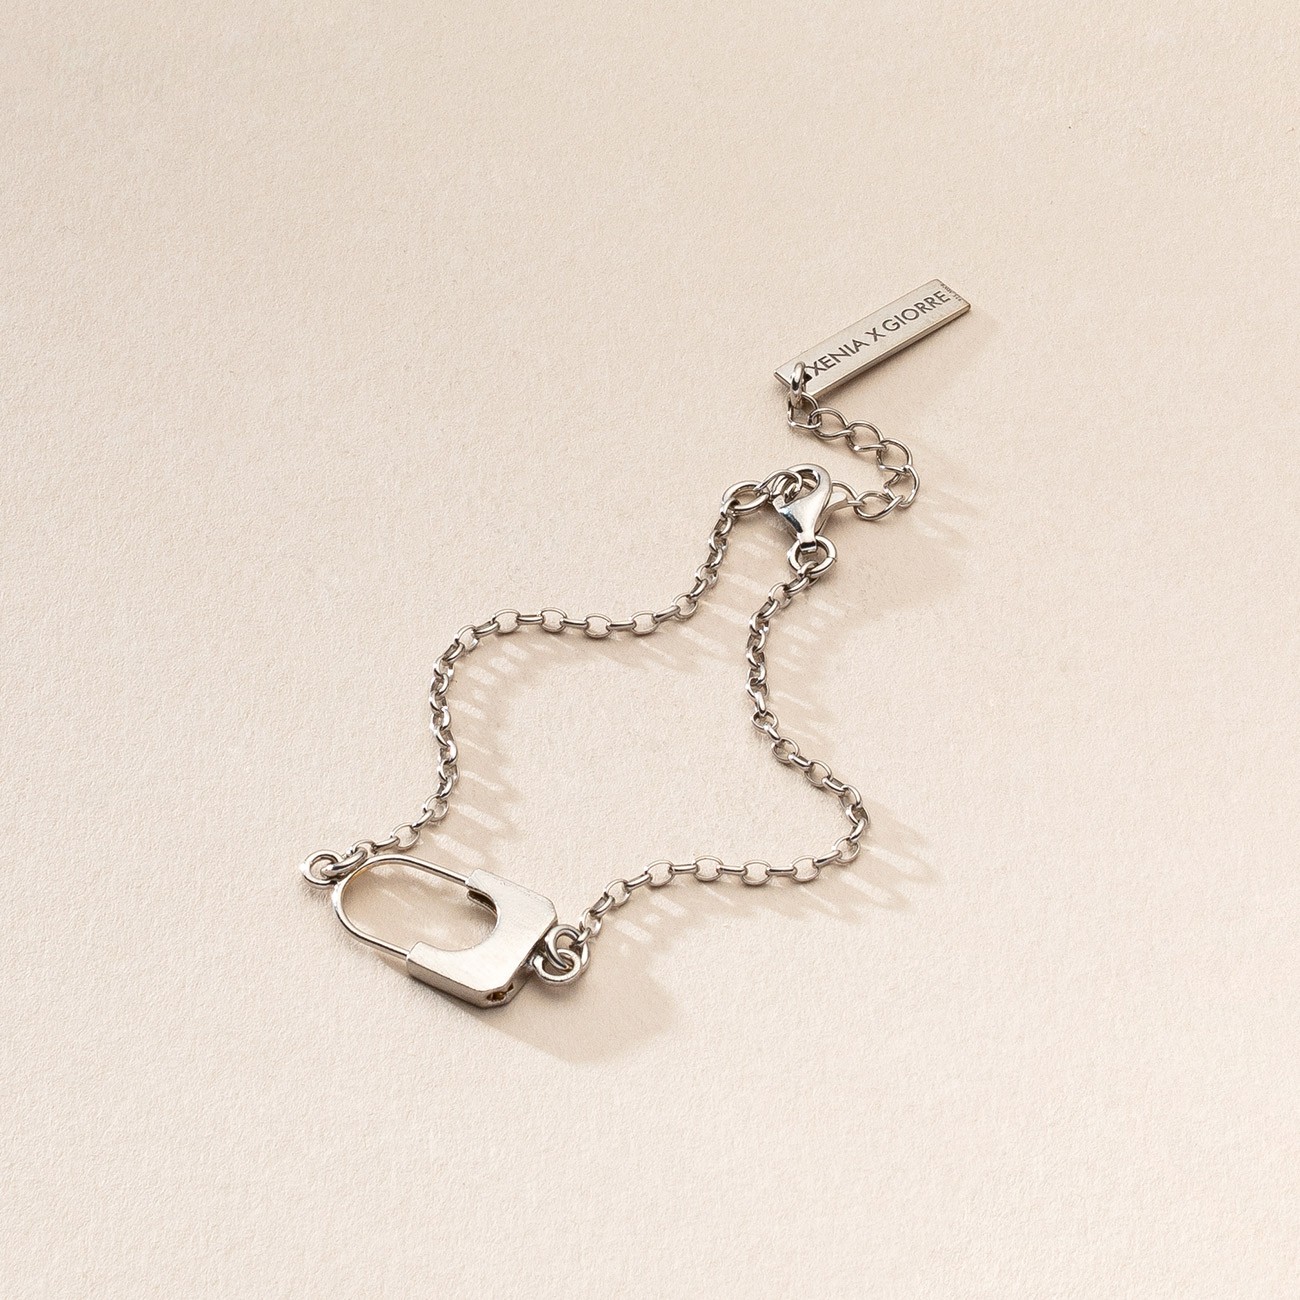 Necklace with padlock, sterling silver 925, XENIA x GIORRE